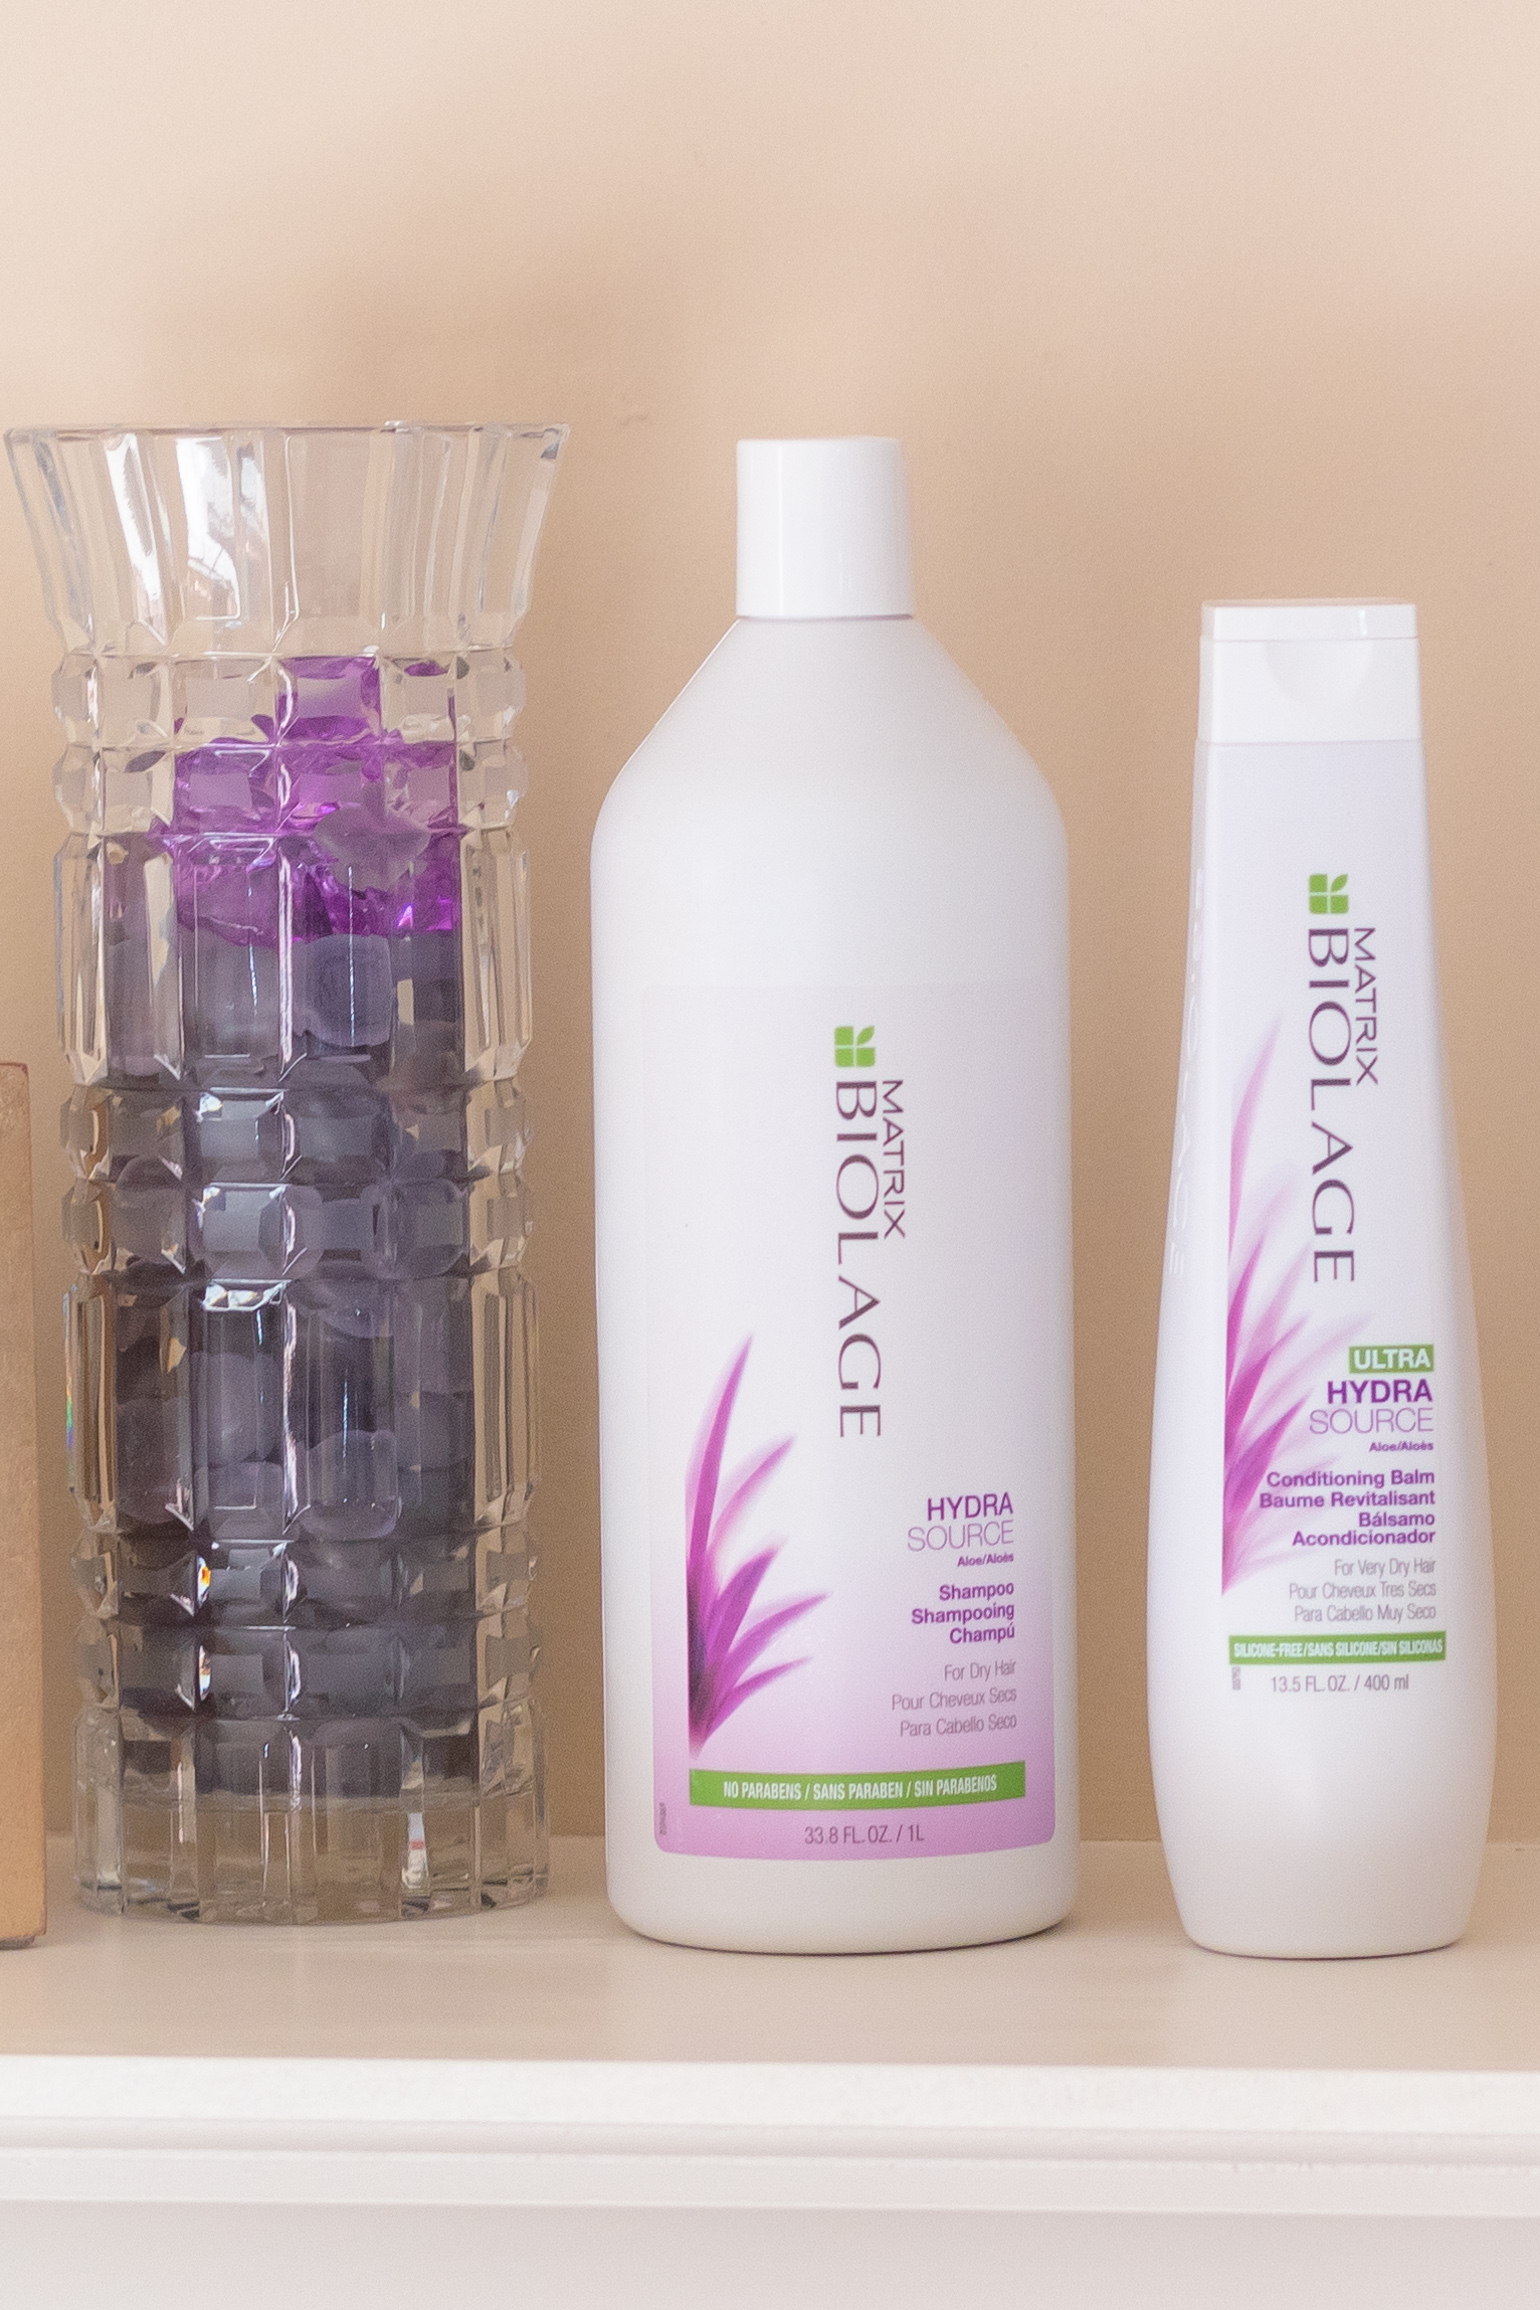 A Shampoo and Conditioner for Dry Hair - Dressed in Faith